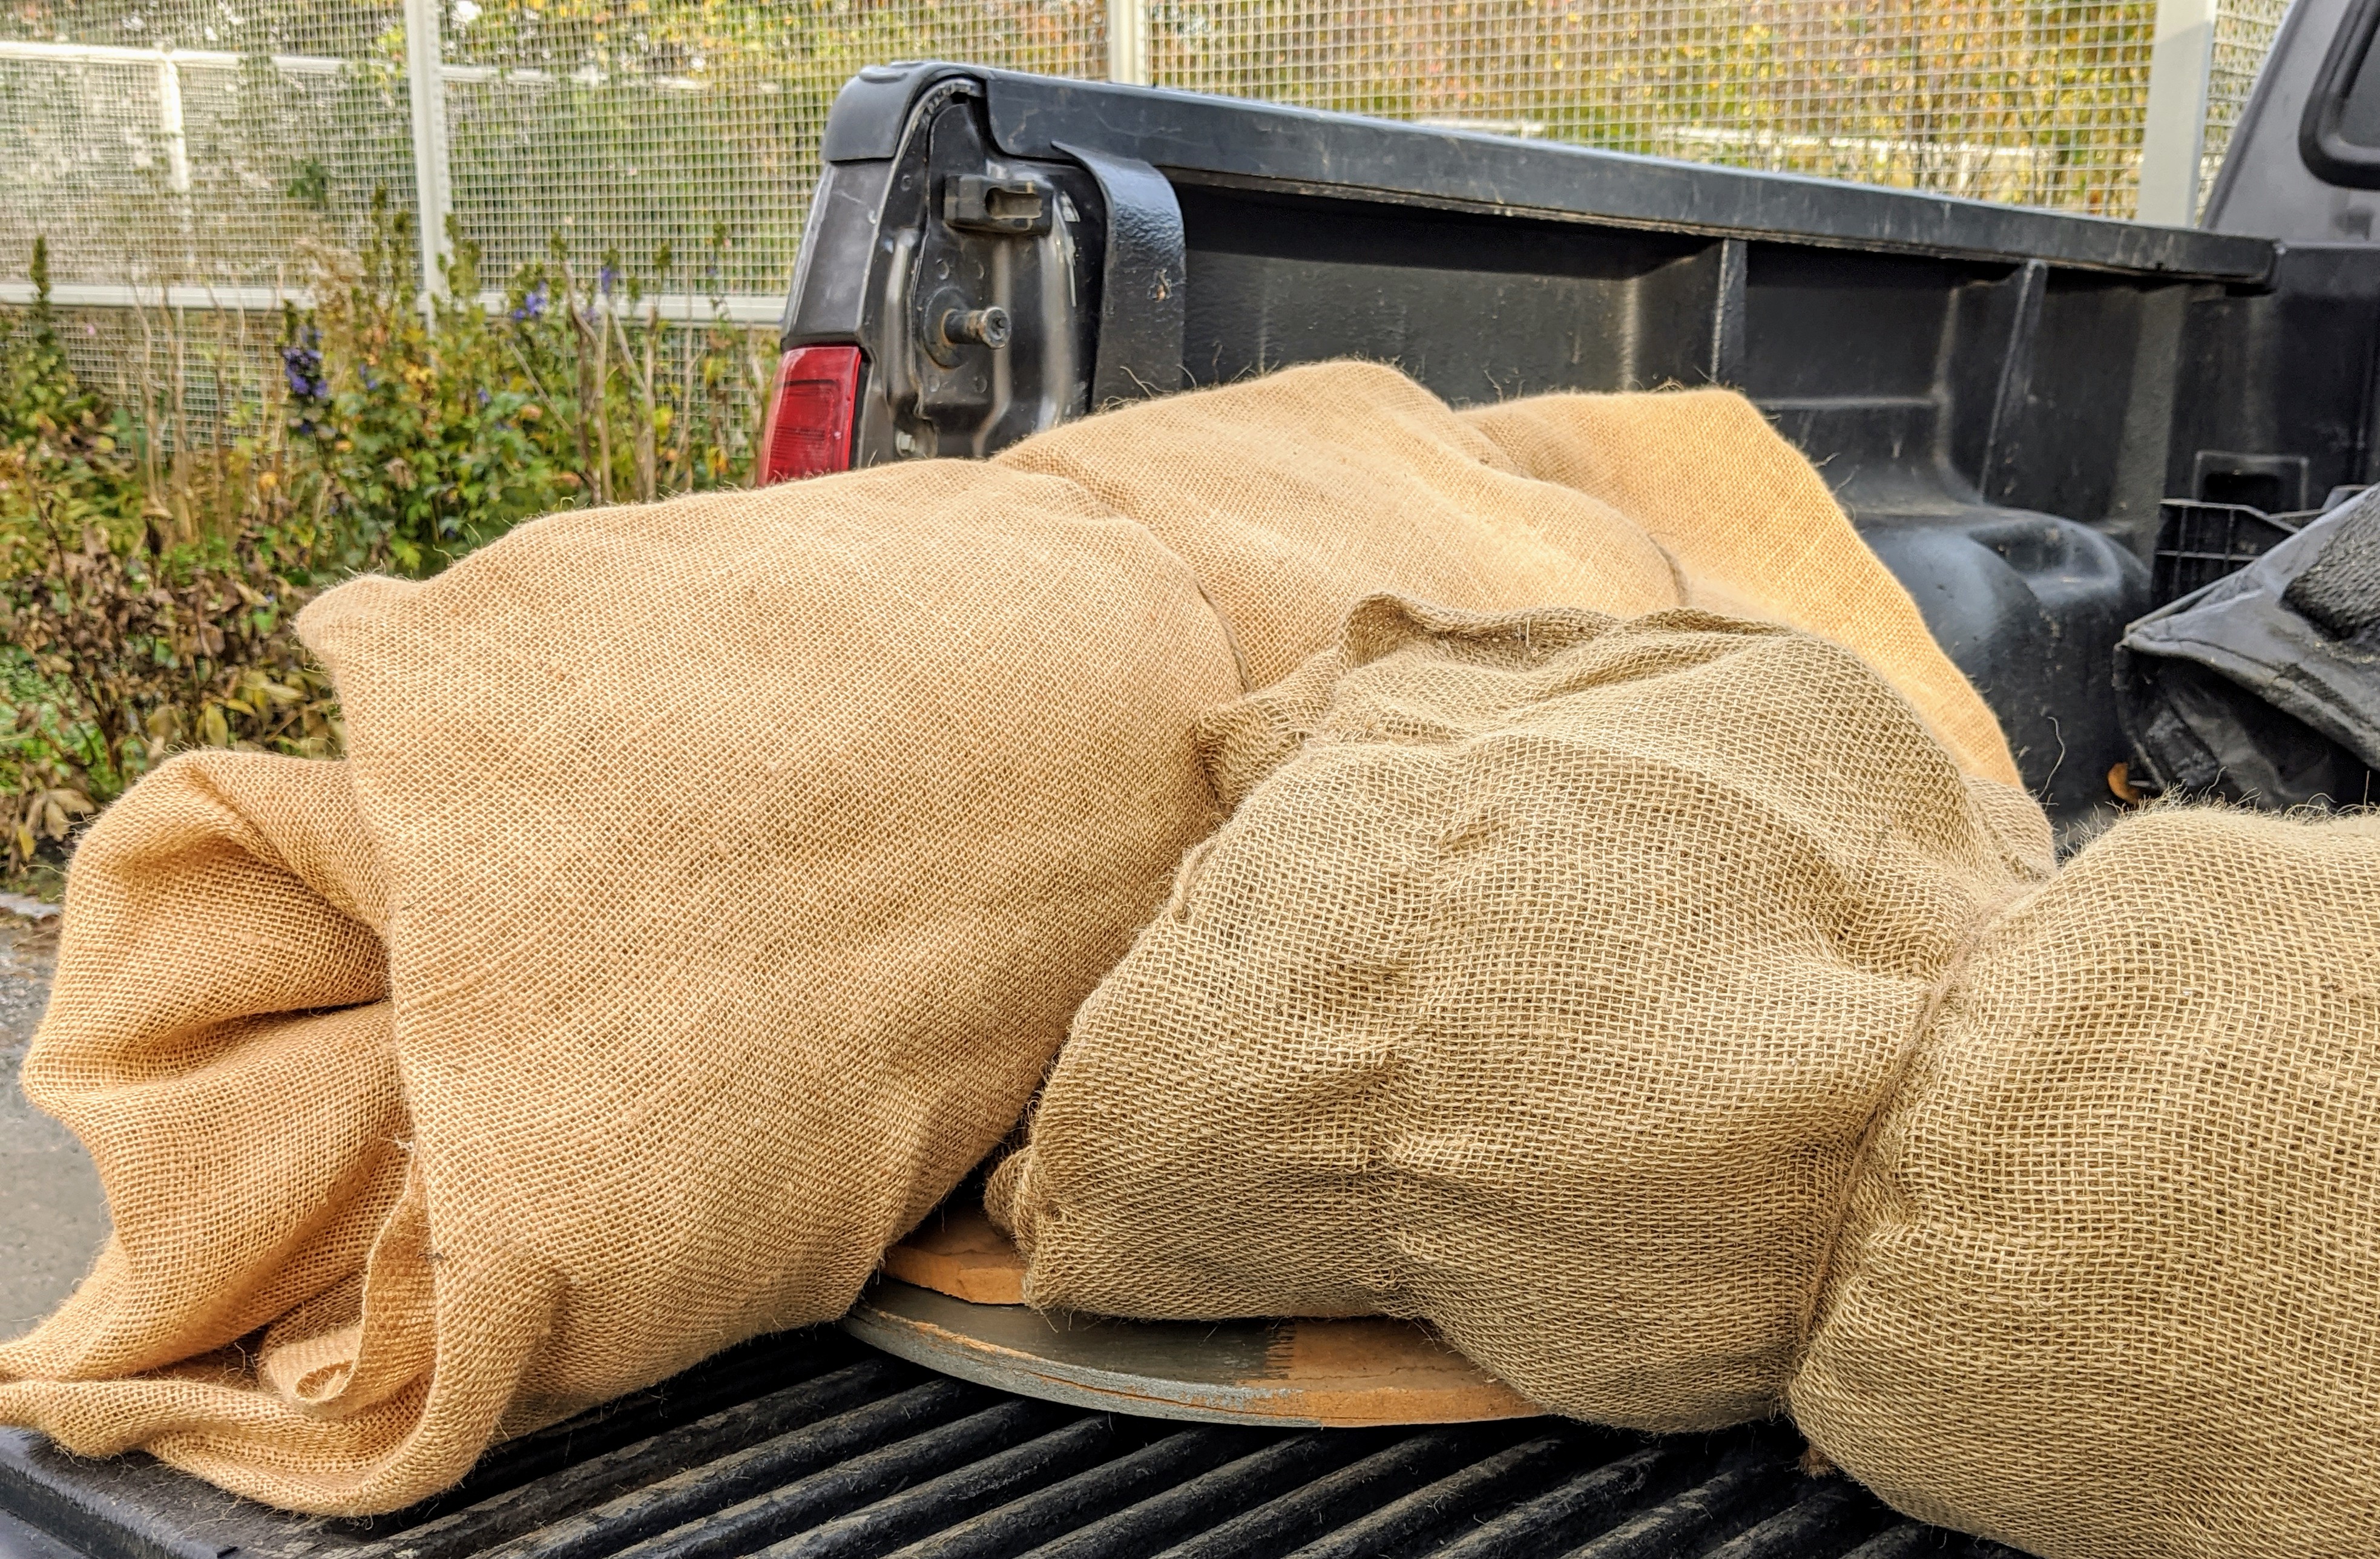 Using Burlap to Protect My Outdoor Urns - The Martha Stewart Blog